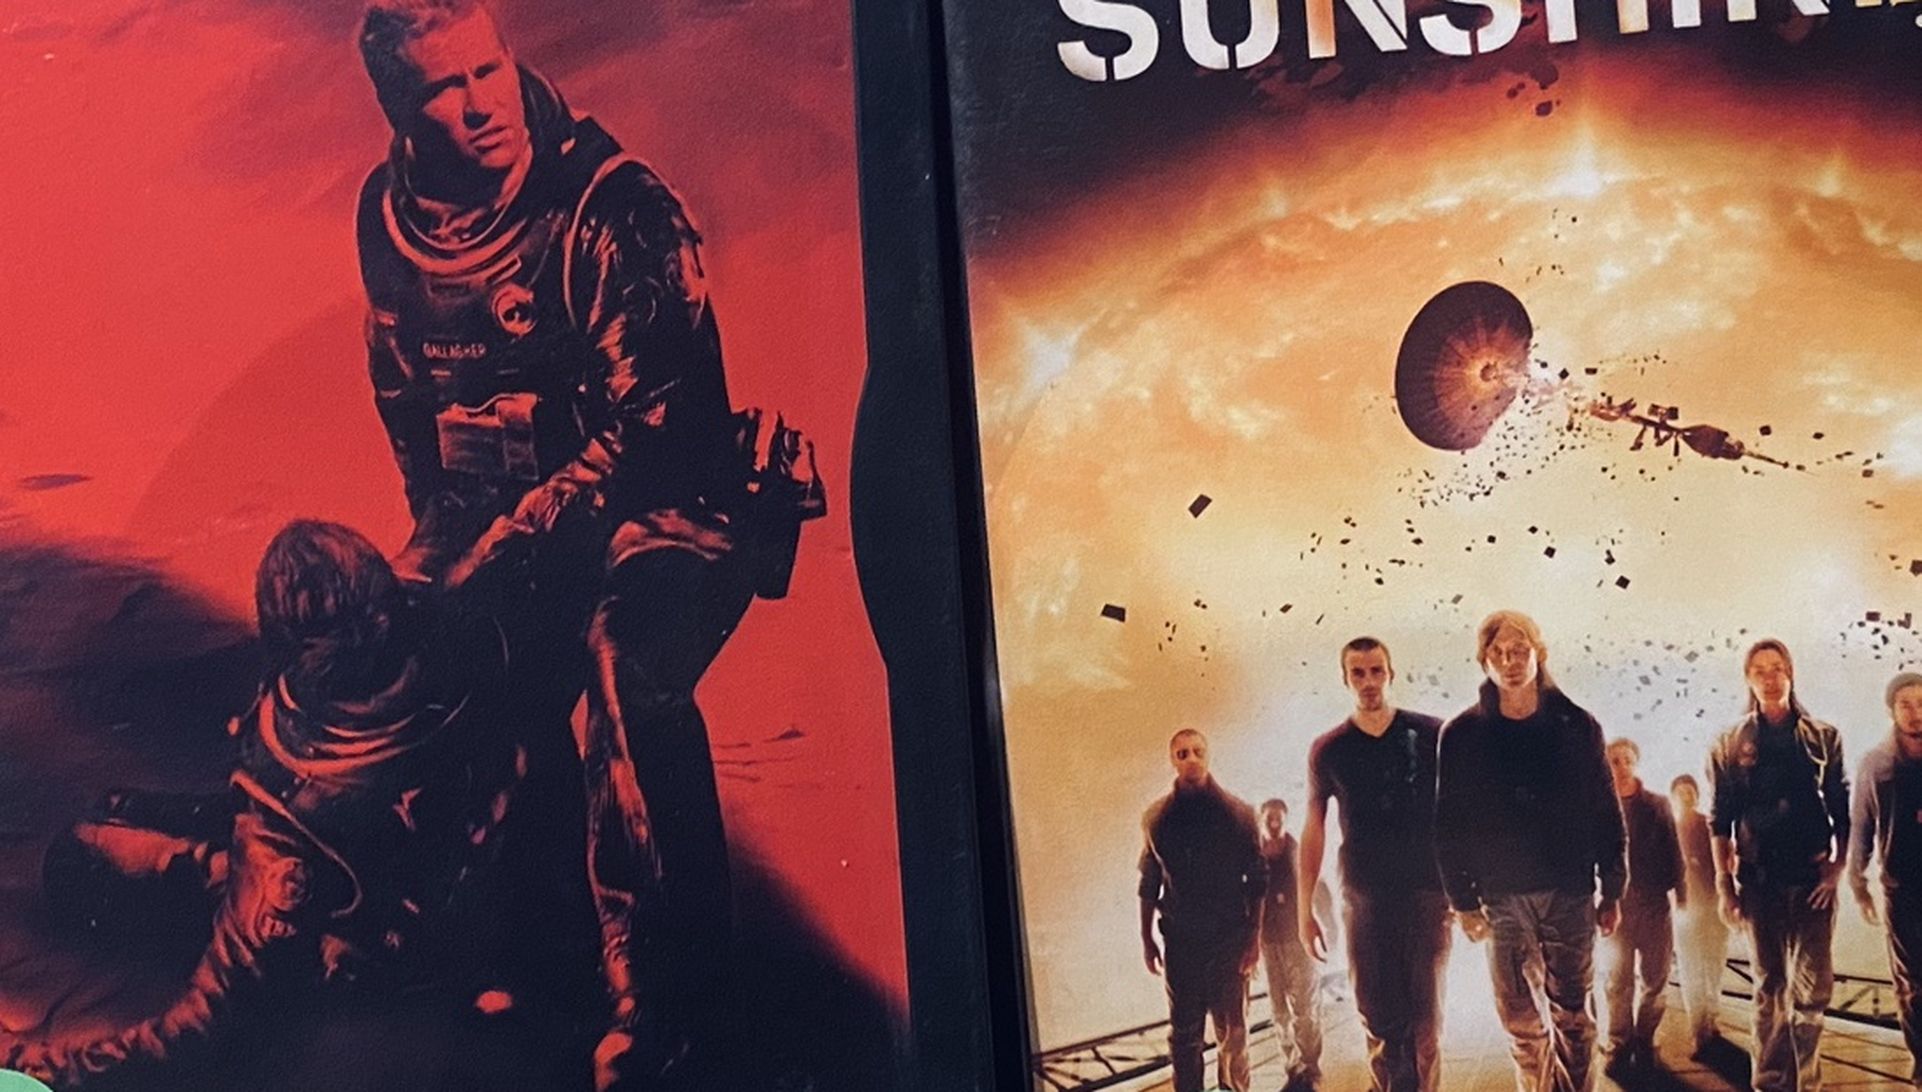 2 DISC SCI-FI DVD MOVIE SET: Includes Sunshine & Red planet